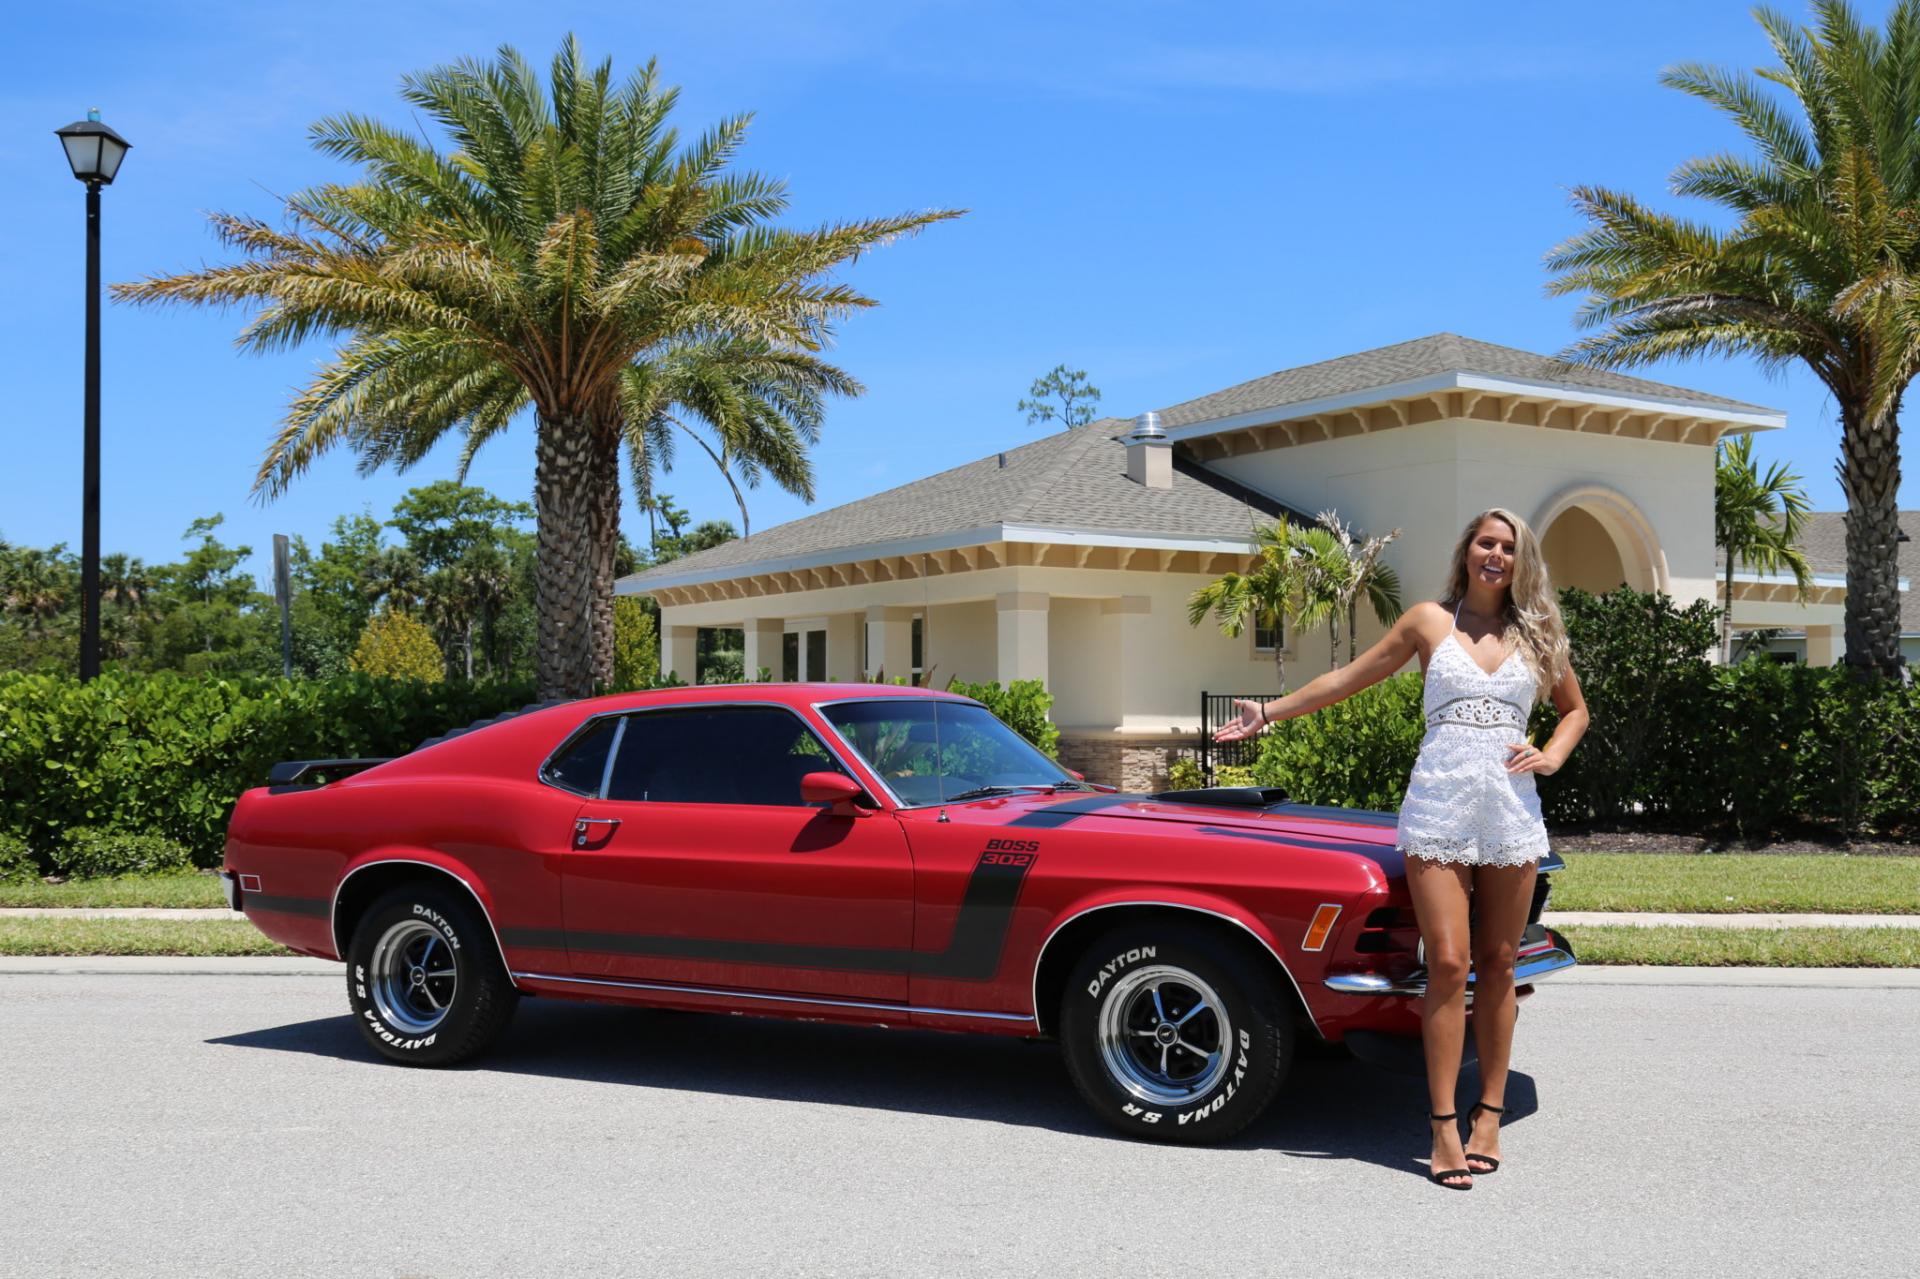 Used 1970 Ford Mustang 302 Boss for sale Sold at Muscle Cars for Sale Inc. in Fort Myers FL 33912 1